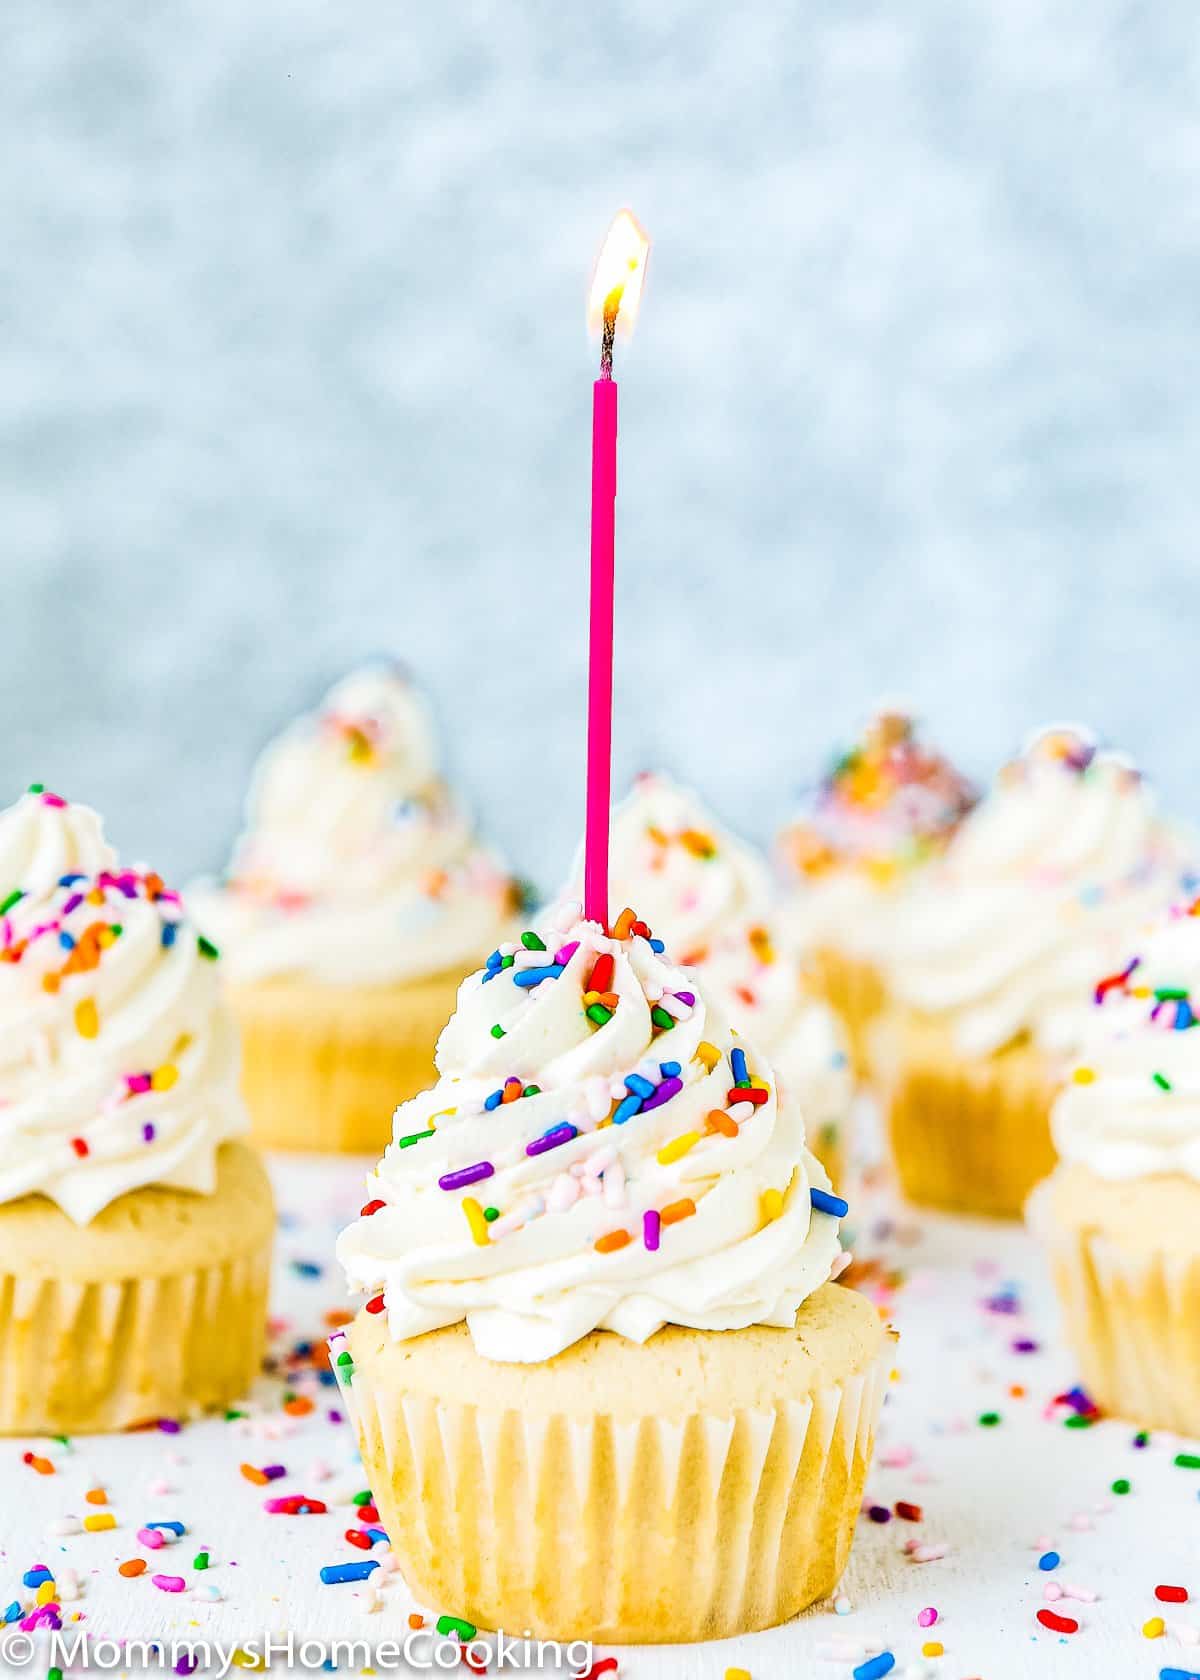 Vanilla cupcakes with frosting, sprinkles, and a candle.